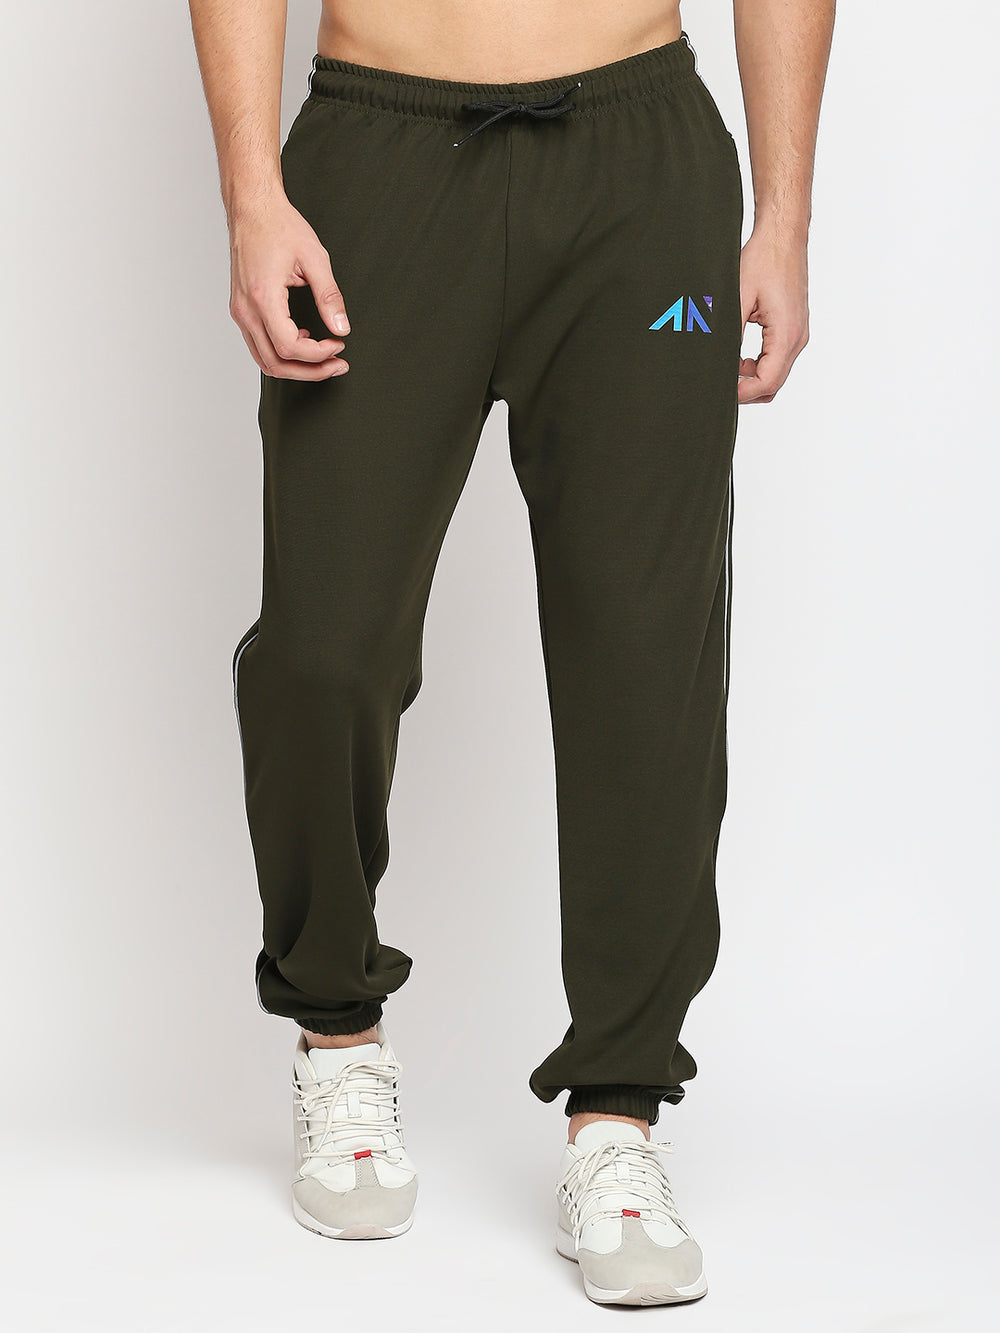 Aesthetic Track Pants | Gym Tracks | Best track pants | Gym joggers